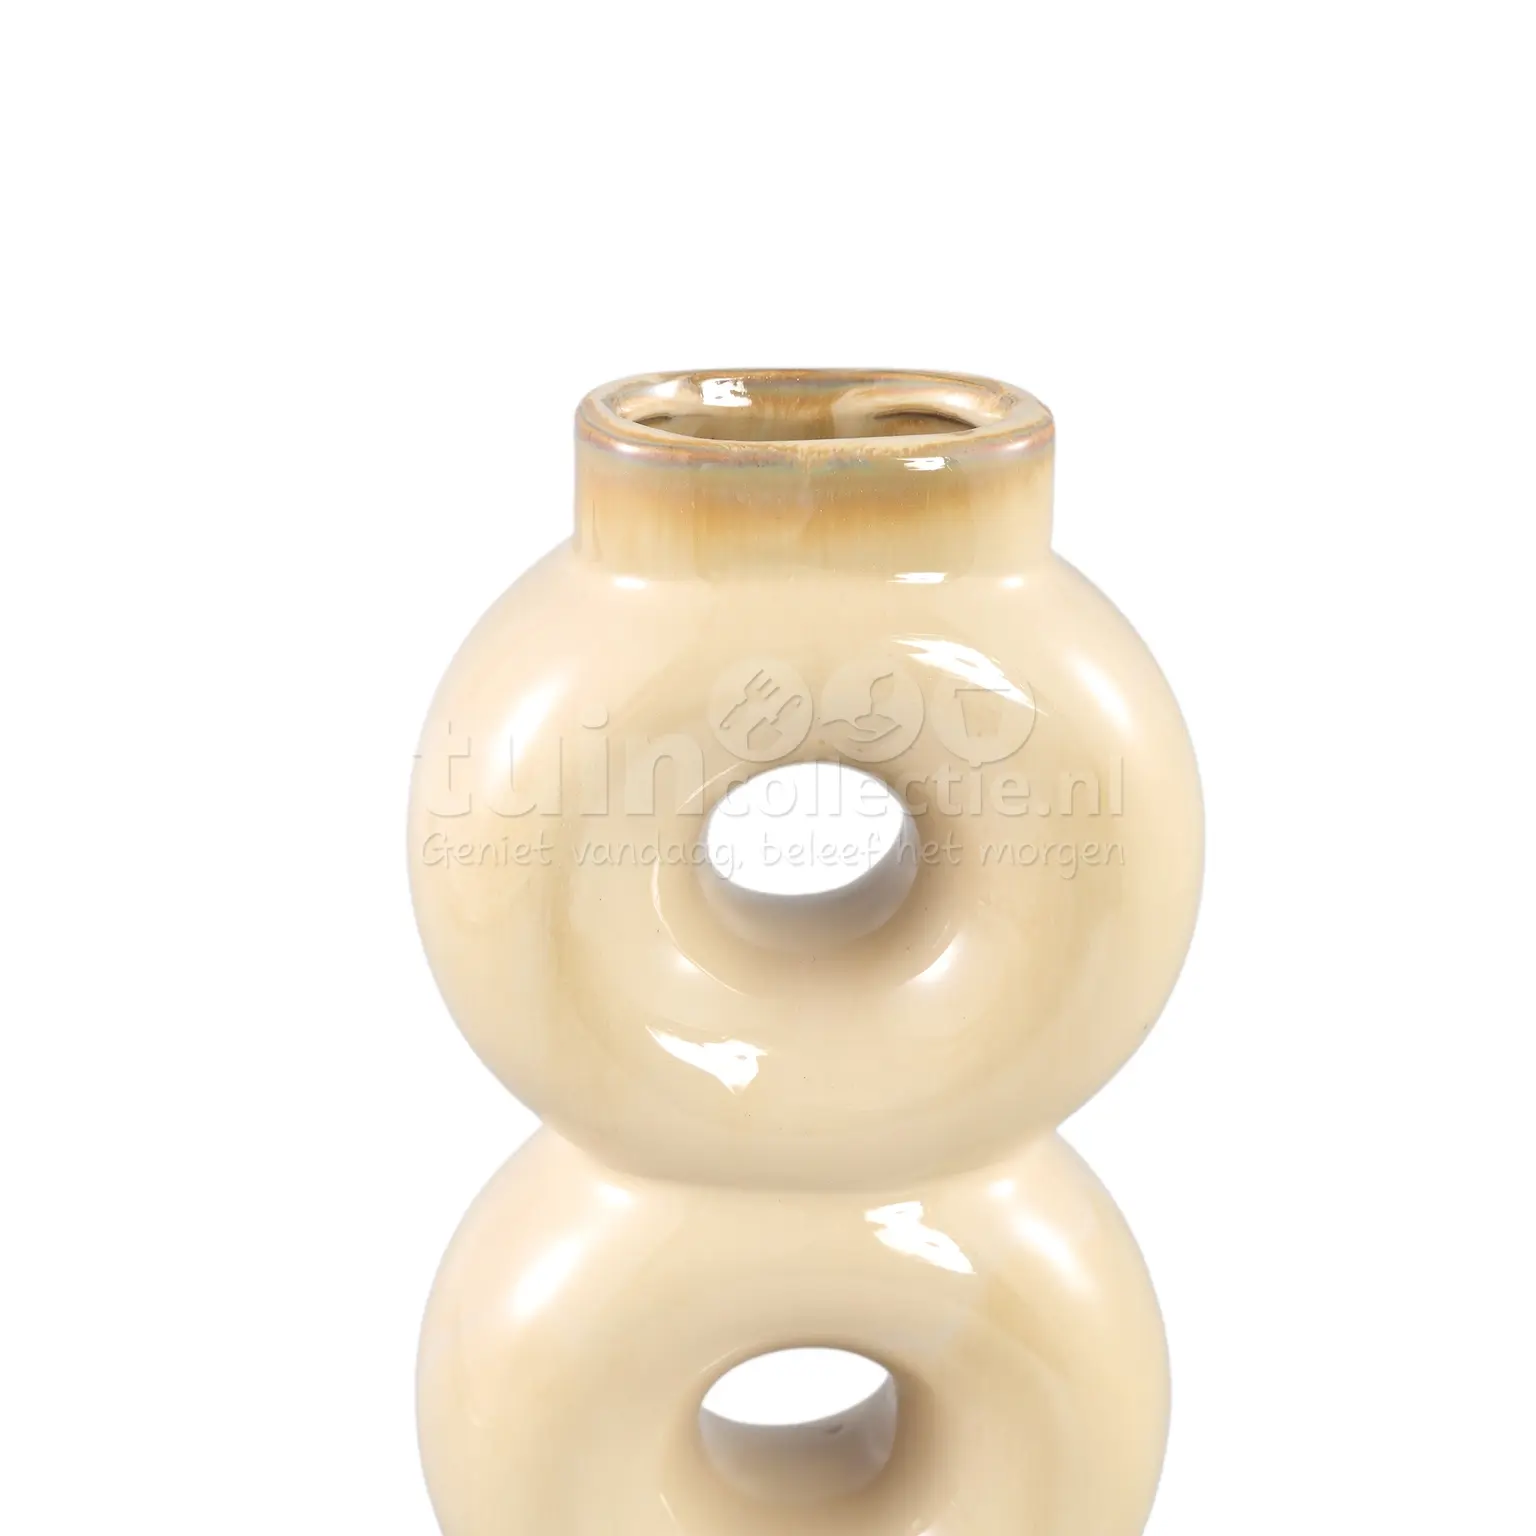 veld Inschrijven buste PTMD Vaas Hedin | Shiny Cream | H.29cm | Shop hier! - Tuincollectie.nl